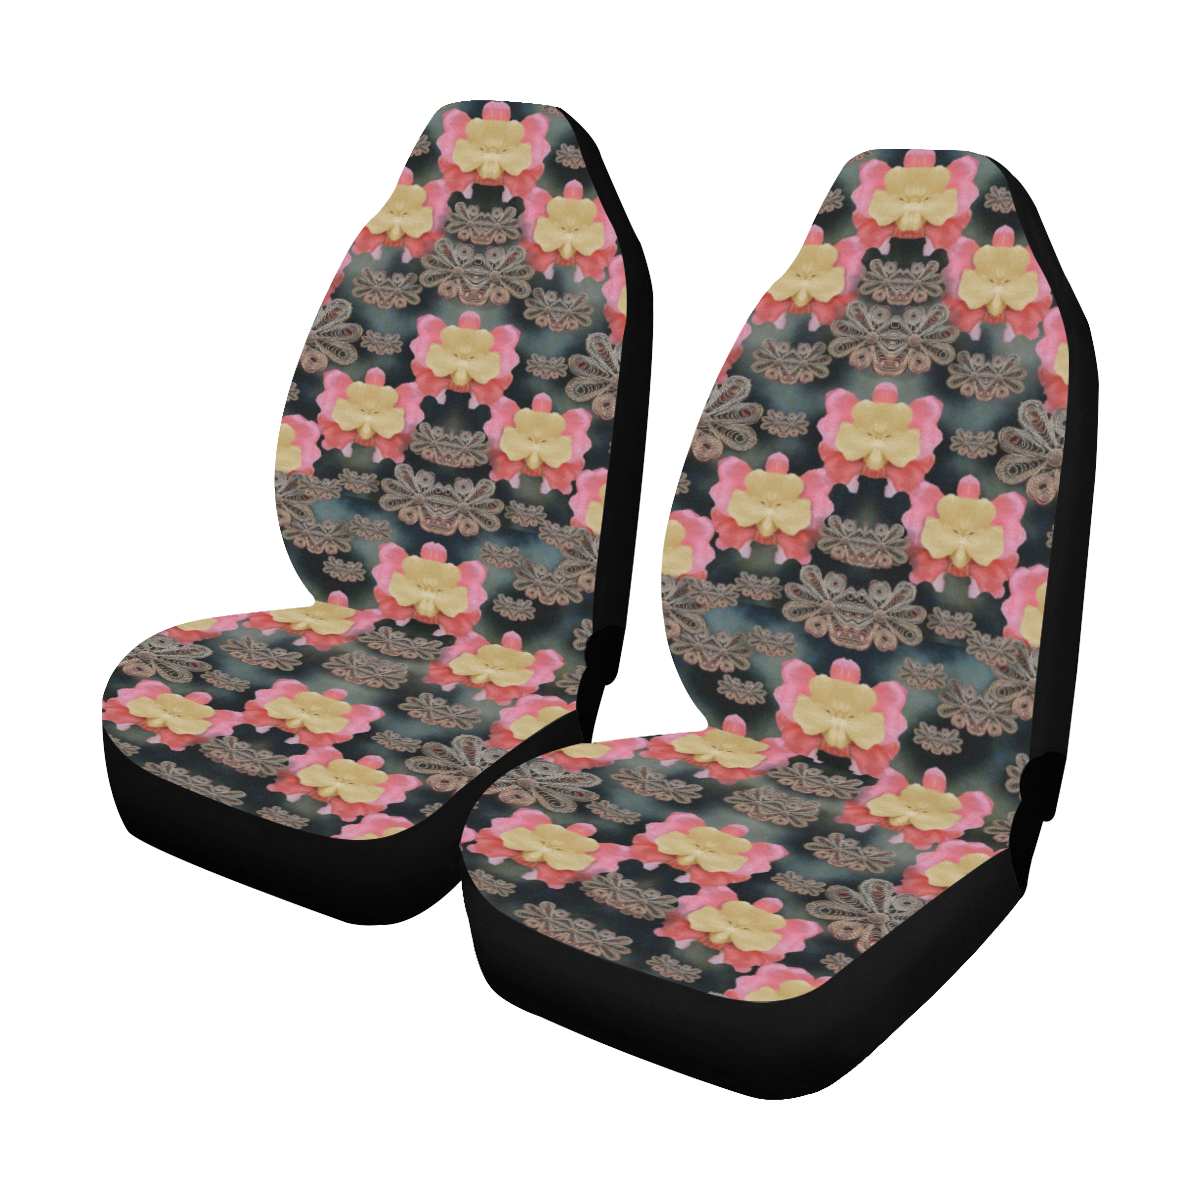 Heavy Metal meets power of the big flower Car Seat Covers (Set of 2)